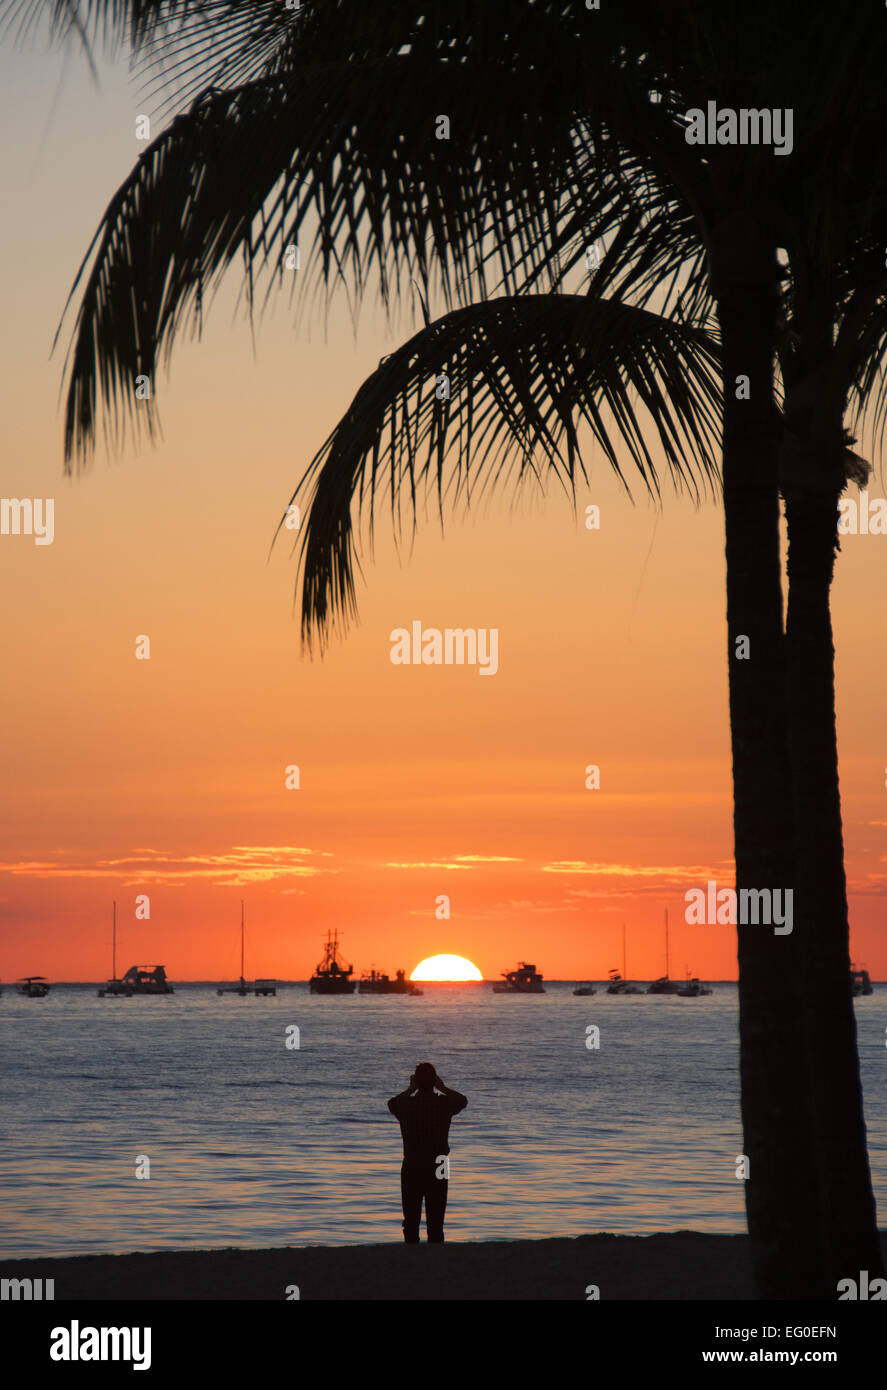 DOMINICAN REPUBLIC. A holidaymaker photographing the sunrise at Punta Cana beach on the Atlantic coast. 2015. Stock Photo